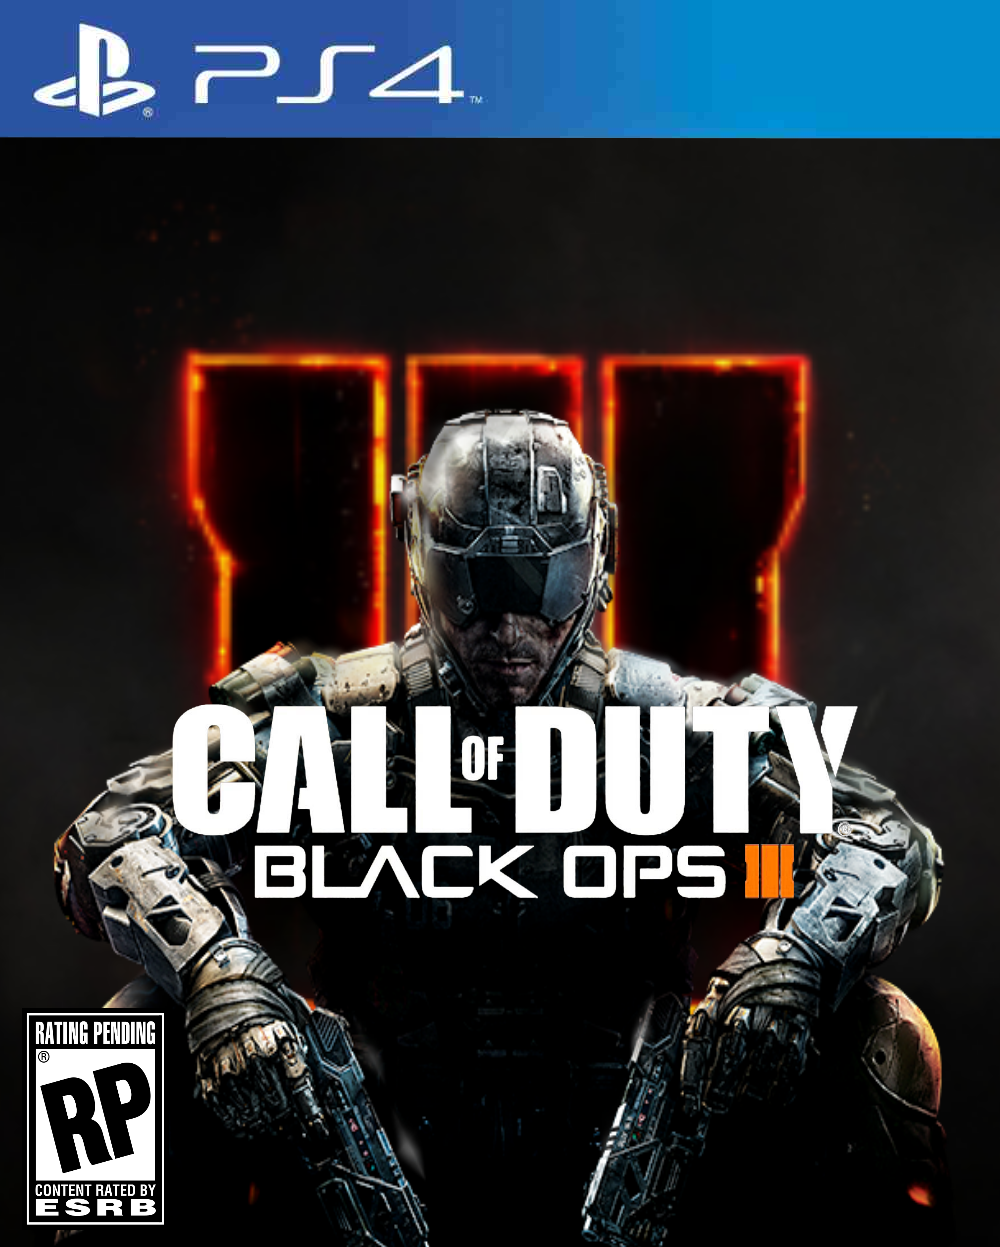 Call of Duty: Black ops III ps4. Call of Duty Black ops 3 ps4. Cod Black ops 3 ps3 обложка. Black ops 4 обложка.